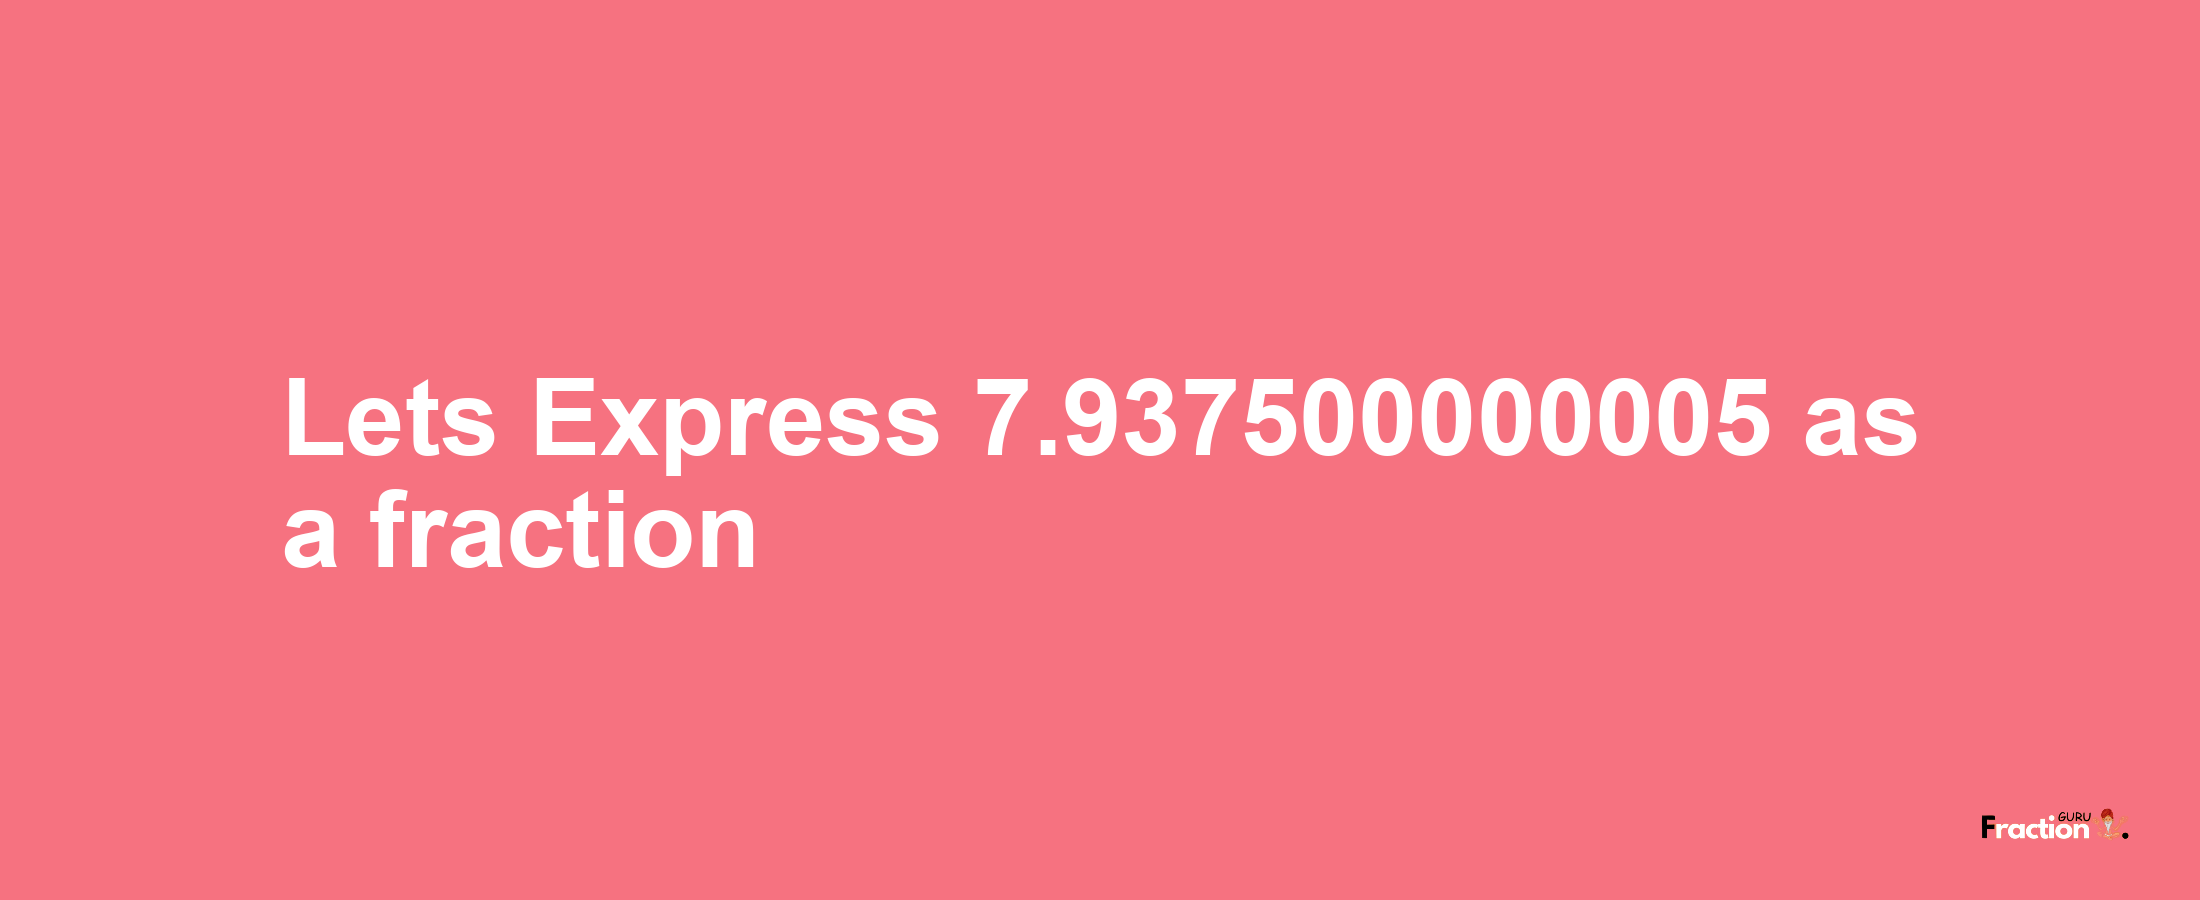 Lets Express 7.937500000005 as afraction